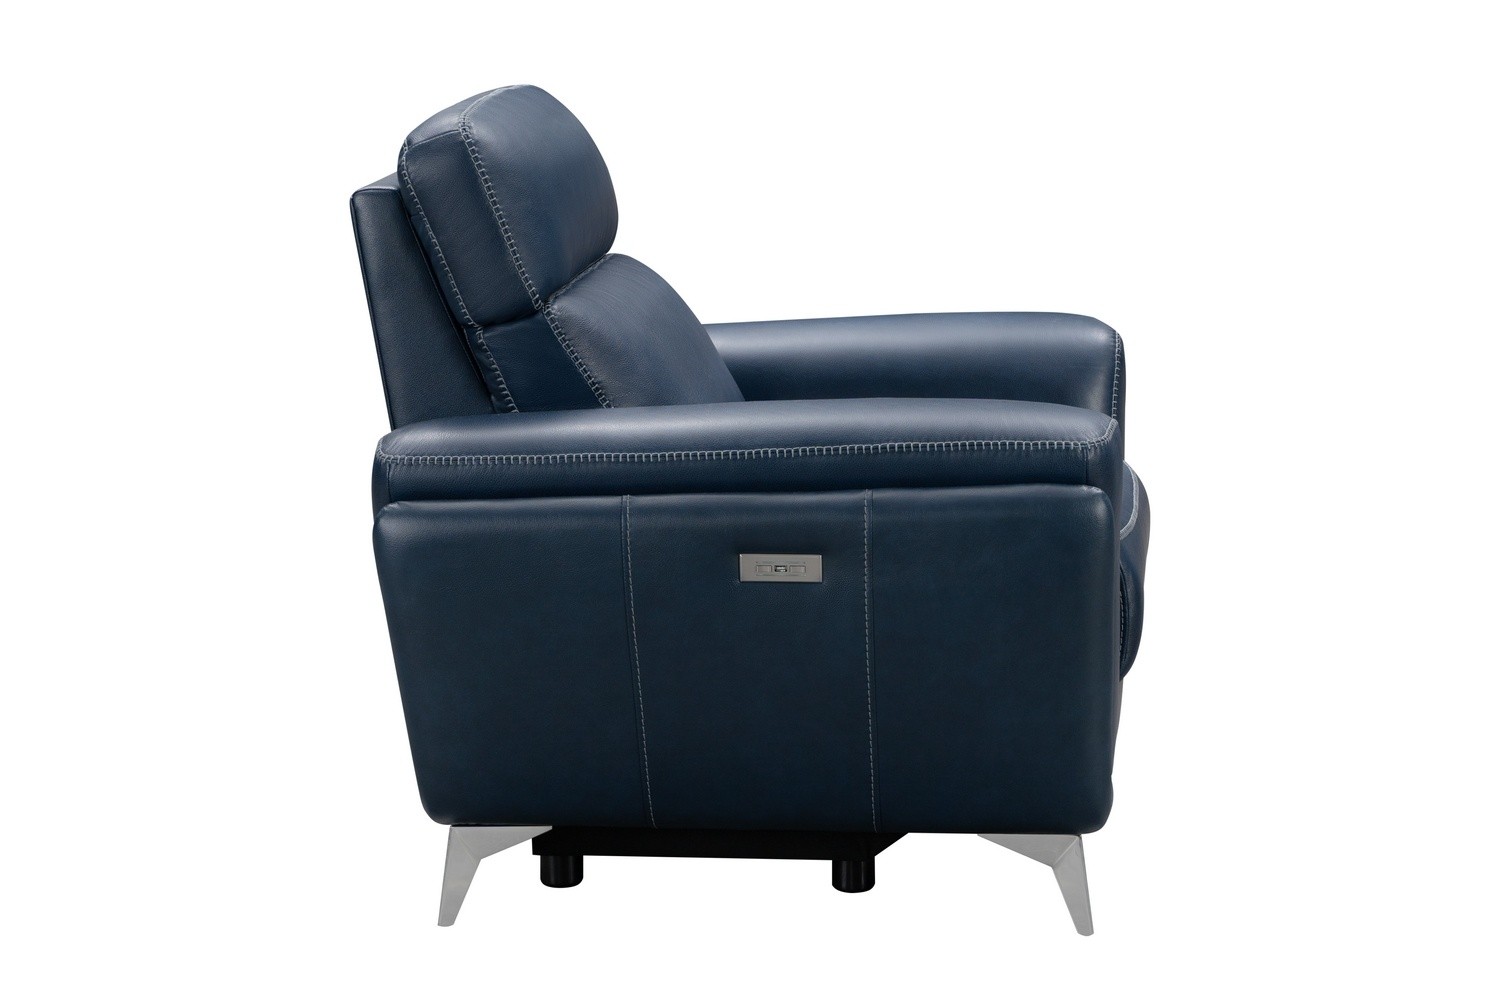 Barcalounger Cameron Power Recliner Chair with Power Head Rest - Marco Navy Blue/Leather Match